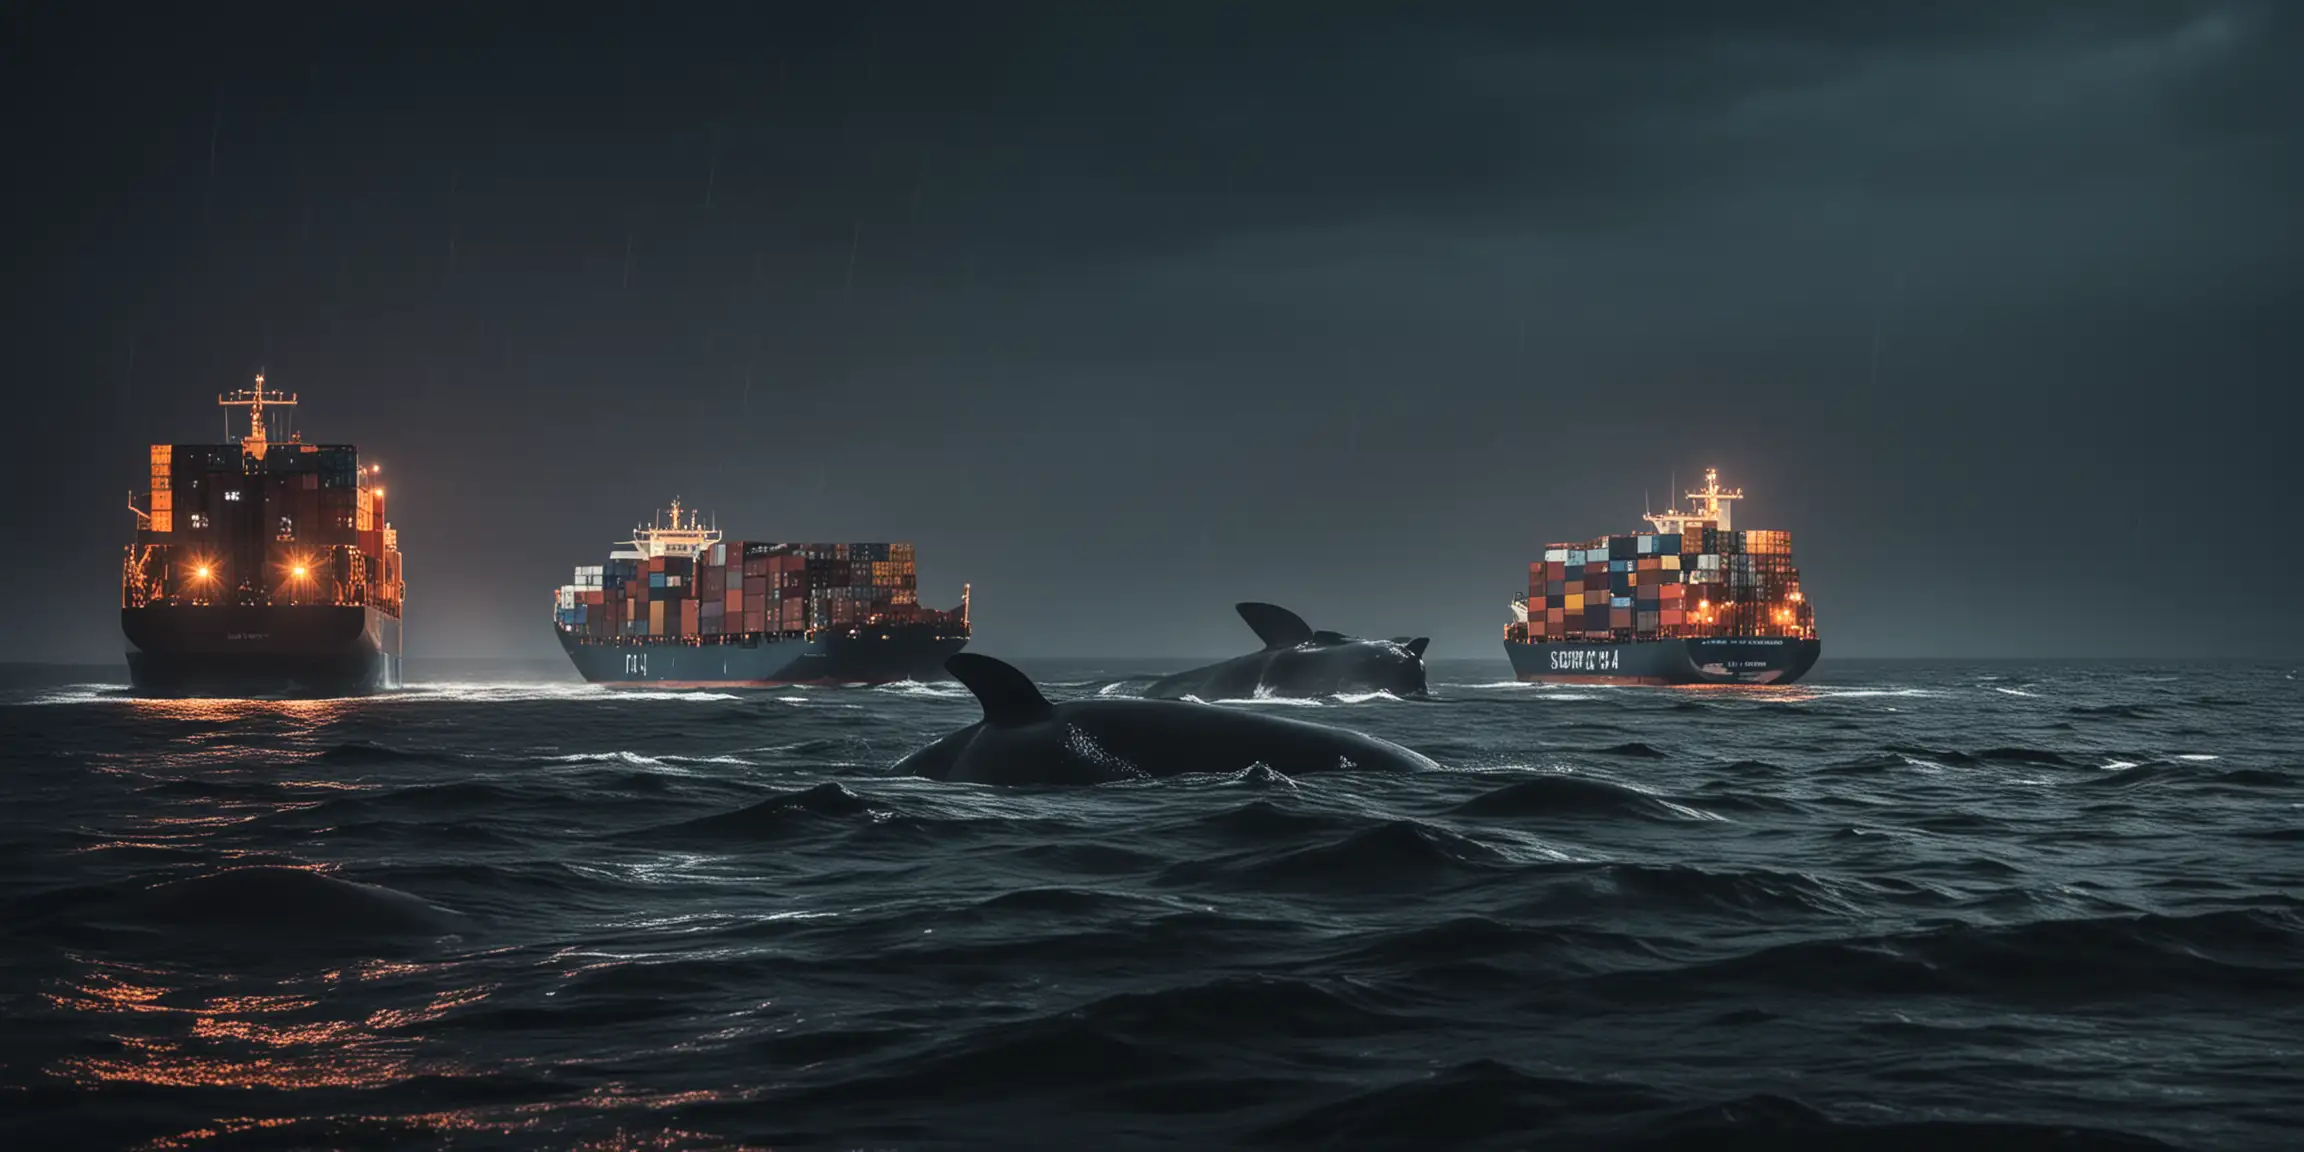 Dramatic Night Ocean Scene with Sperm Whales and Cargo Ships